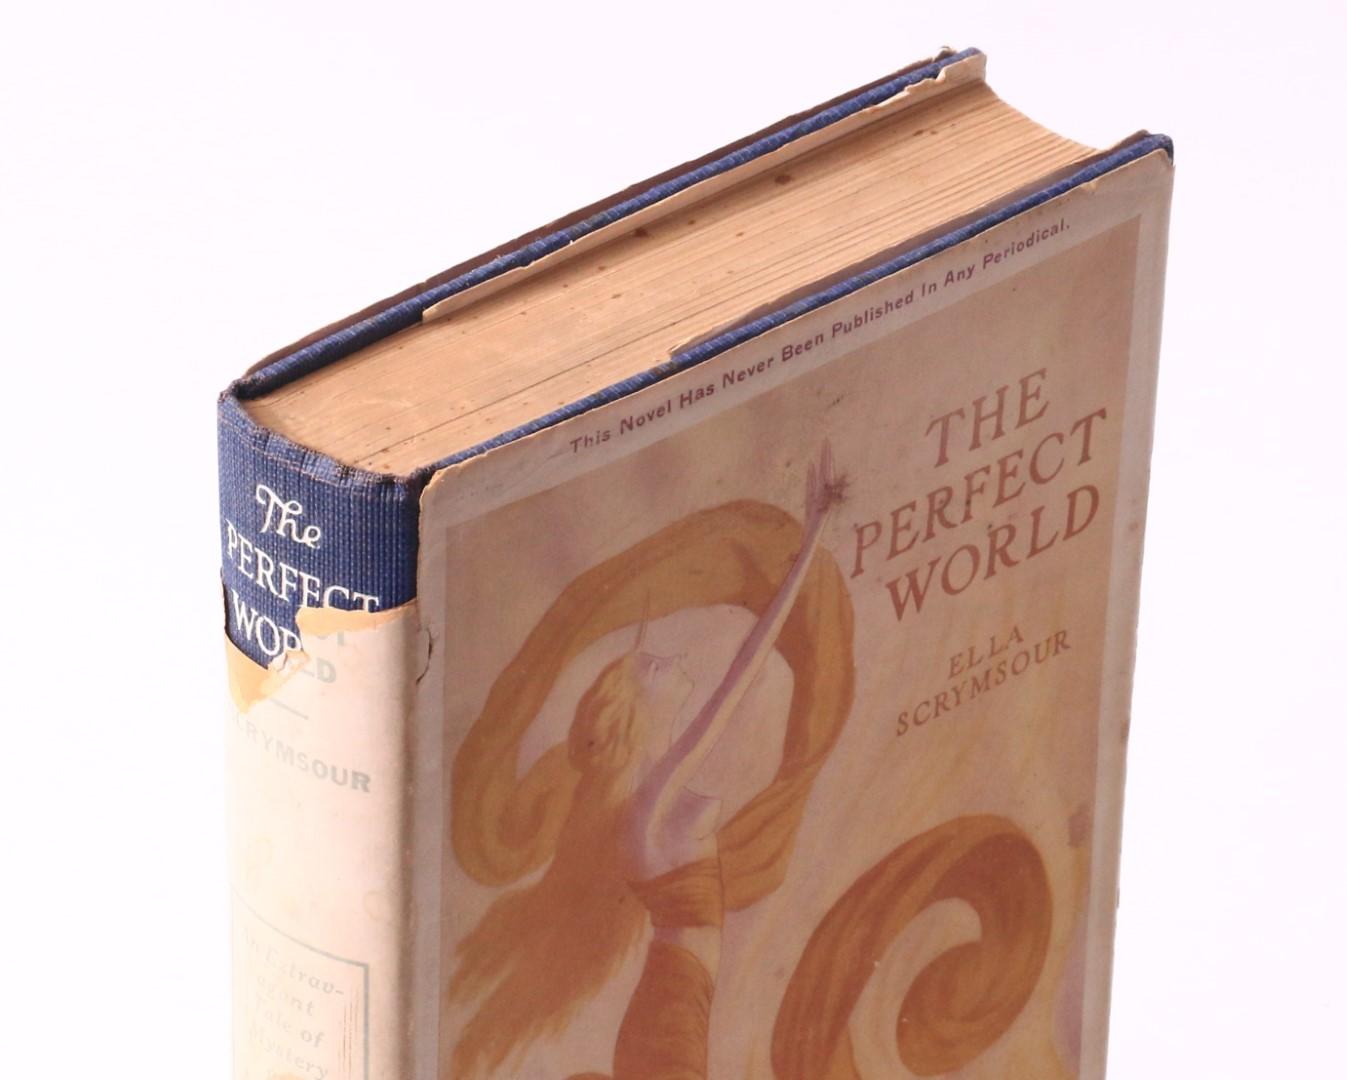 Ella Scrymsour - The Perfect World: A Romance of Strange People and Strange Places - Stokes, 1922, First Edition.